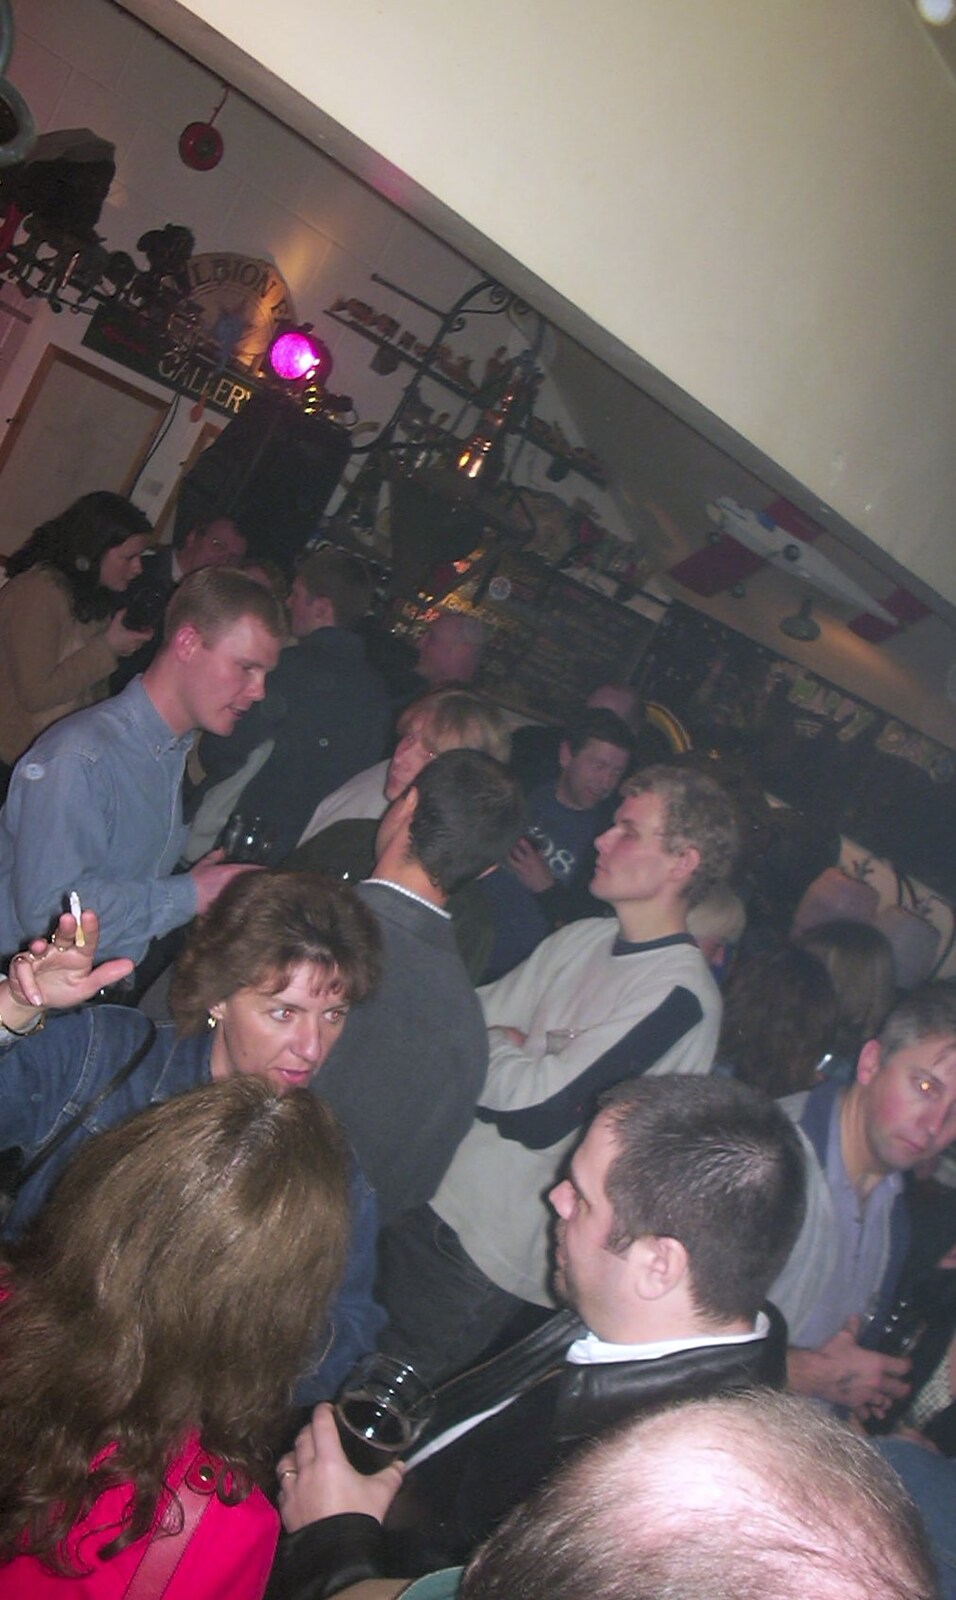 A random crowd scene from The Cider Shed from The BBs at The Cider Shed, Banham, Norfolk - 19th January 2003